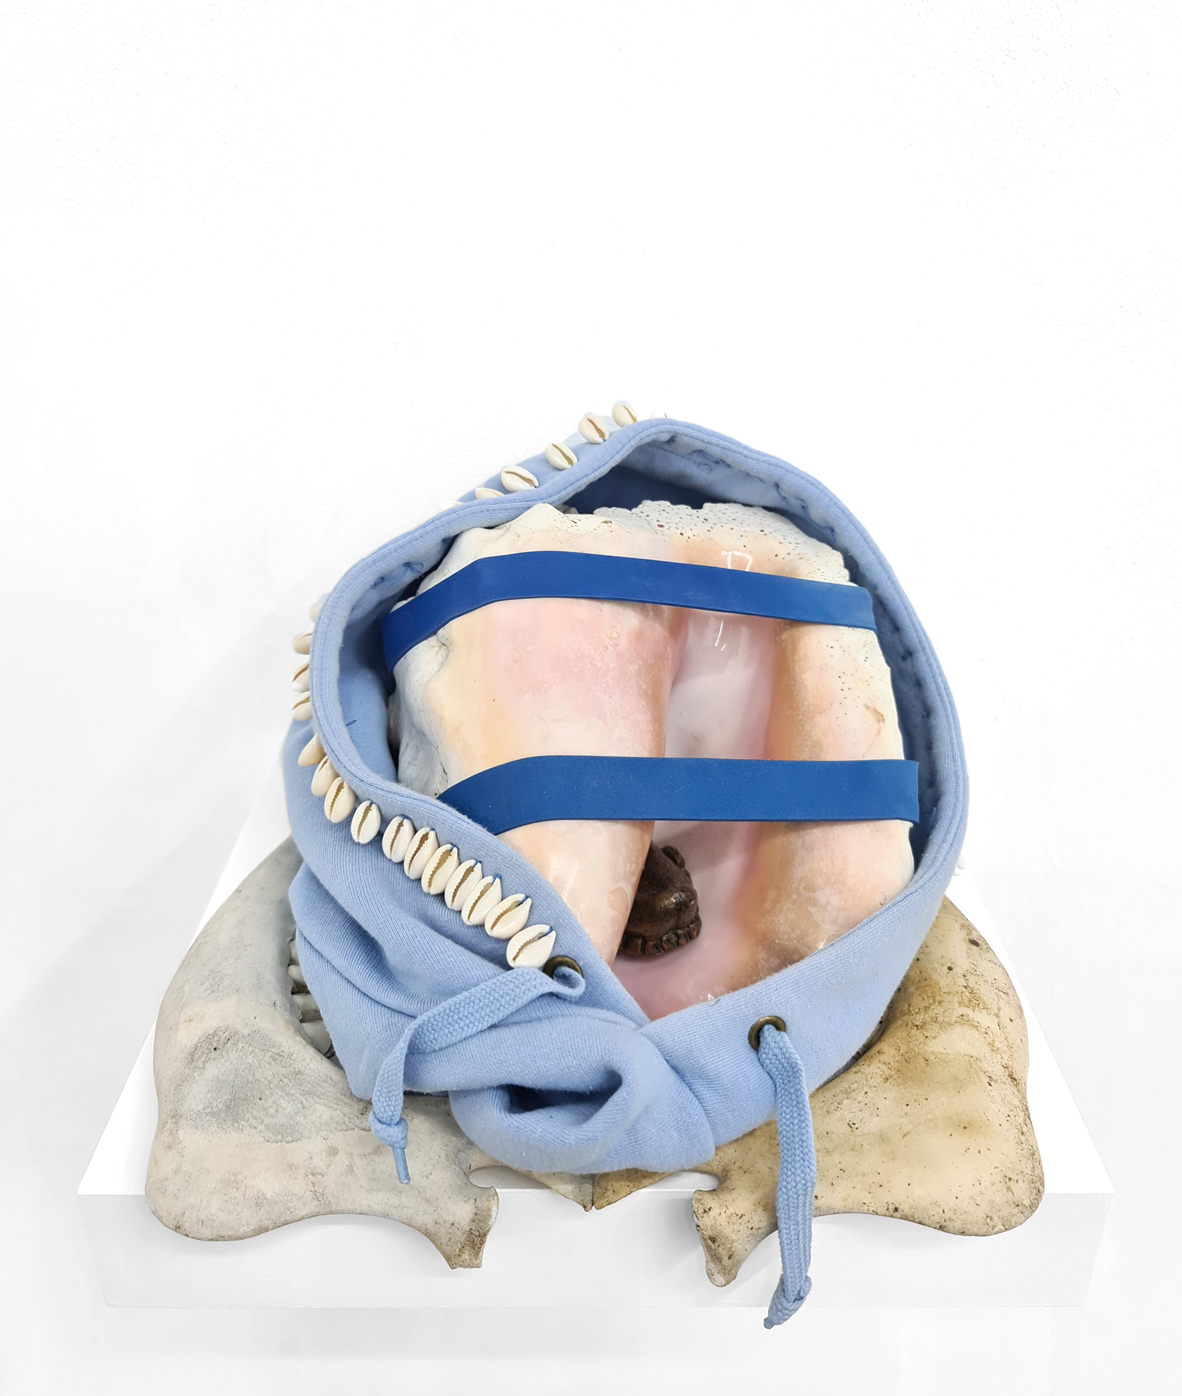 Alberta Whittle, Palaver, 2019 Mixed media with cowrie shells, bronze tongue, cow jaw bones and hoodie, Dimensions variable. Courtesy of the artist and Copperfield.